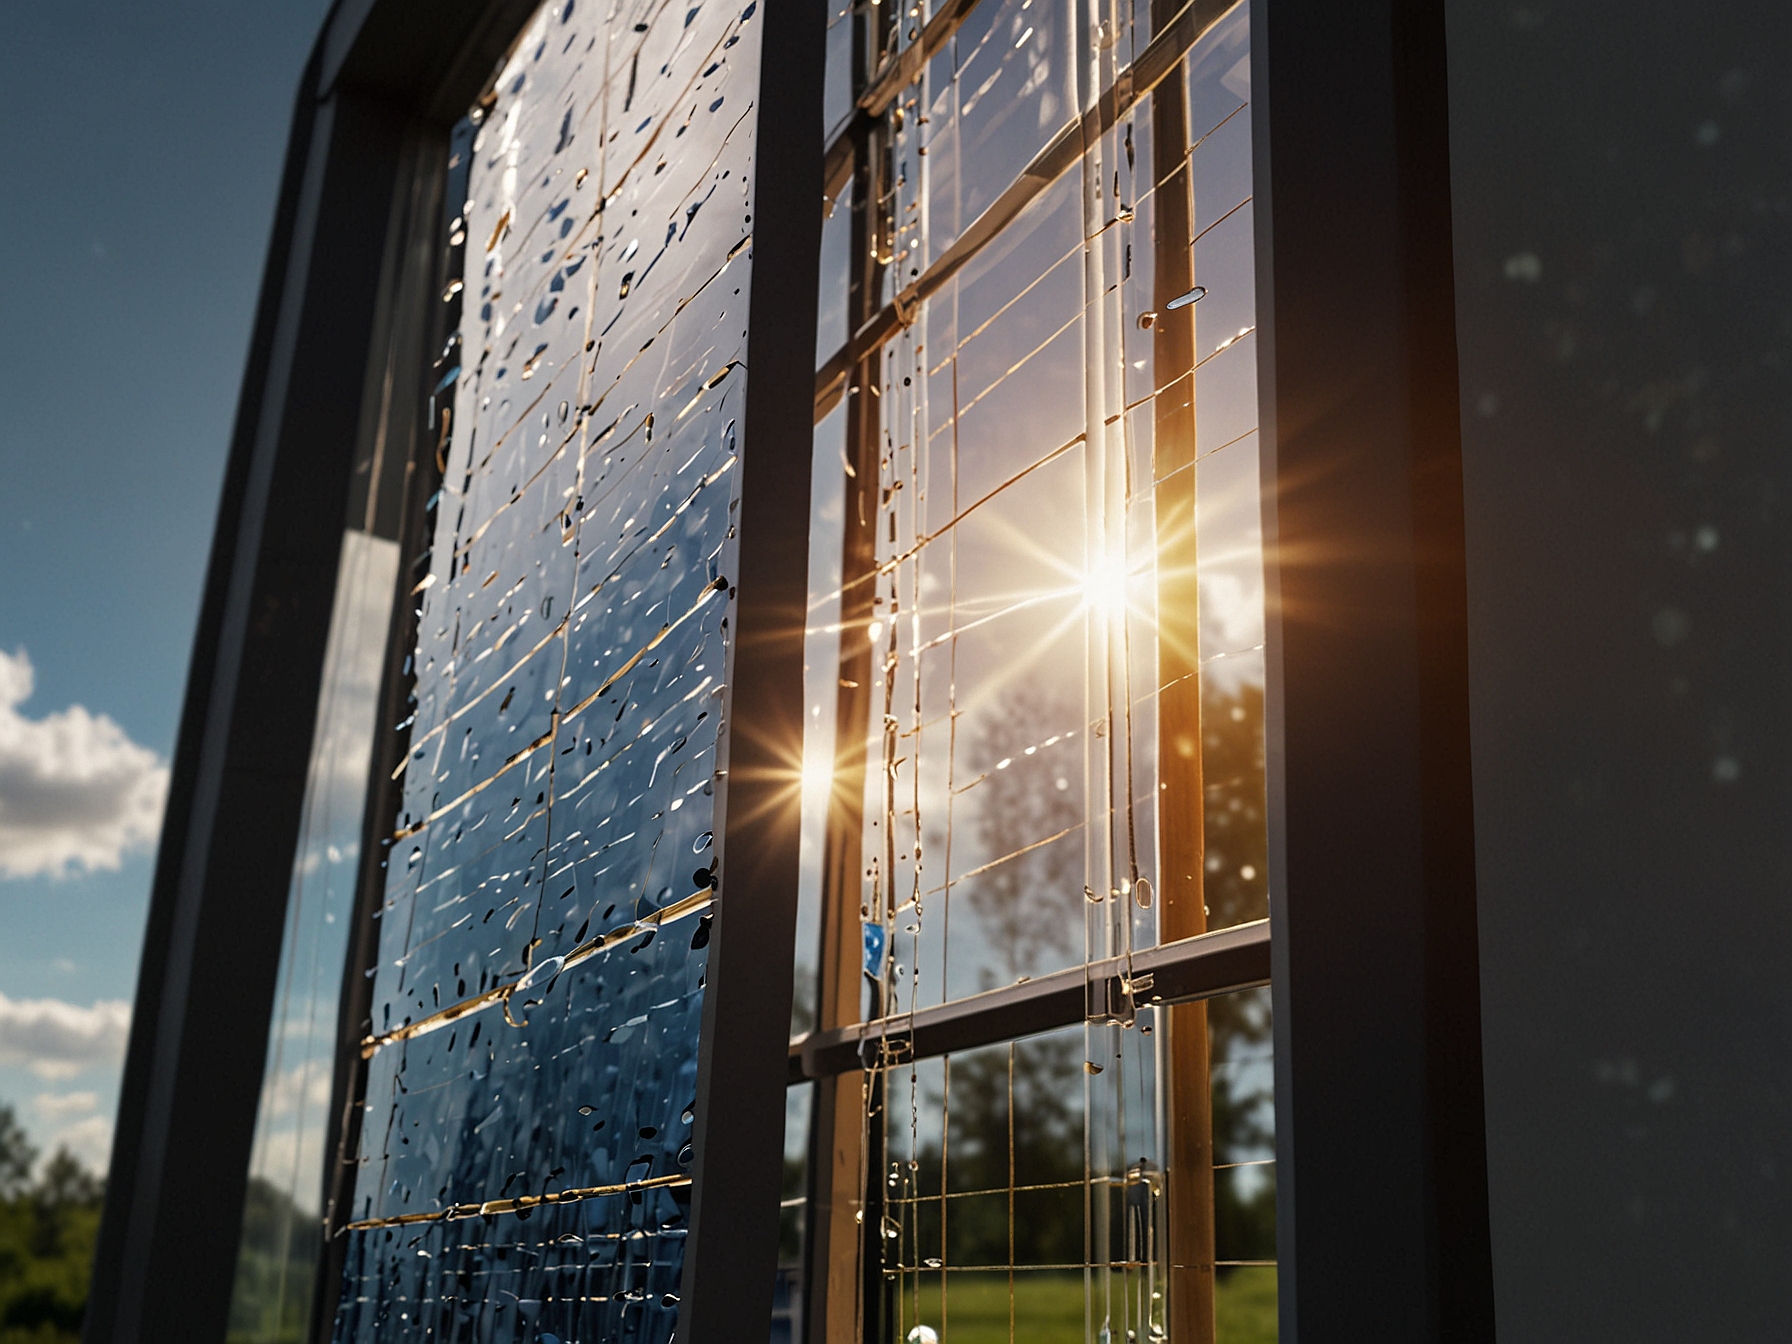 Close-up of ClearVue's solar windows embedded with microscopic solar cells, capturing sunlight and converting it into electricity without obstructing the view or altering the glass's appearance.